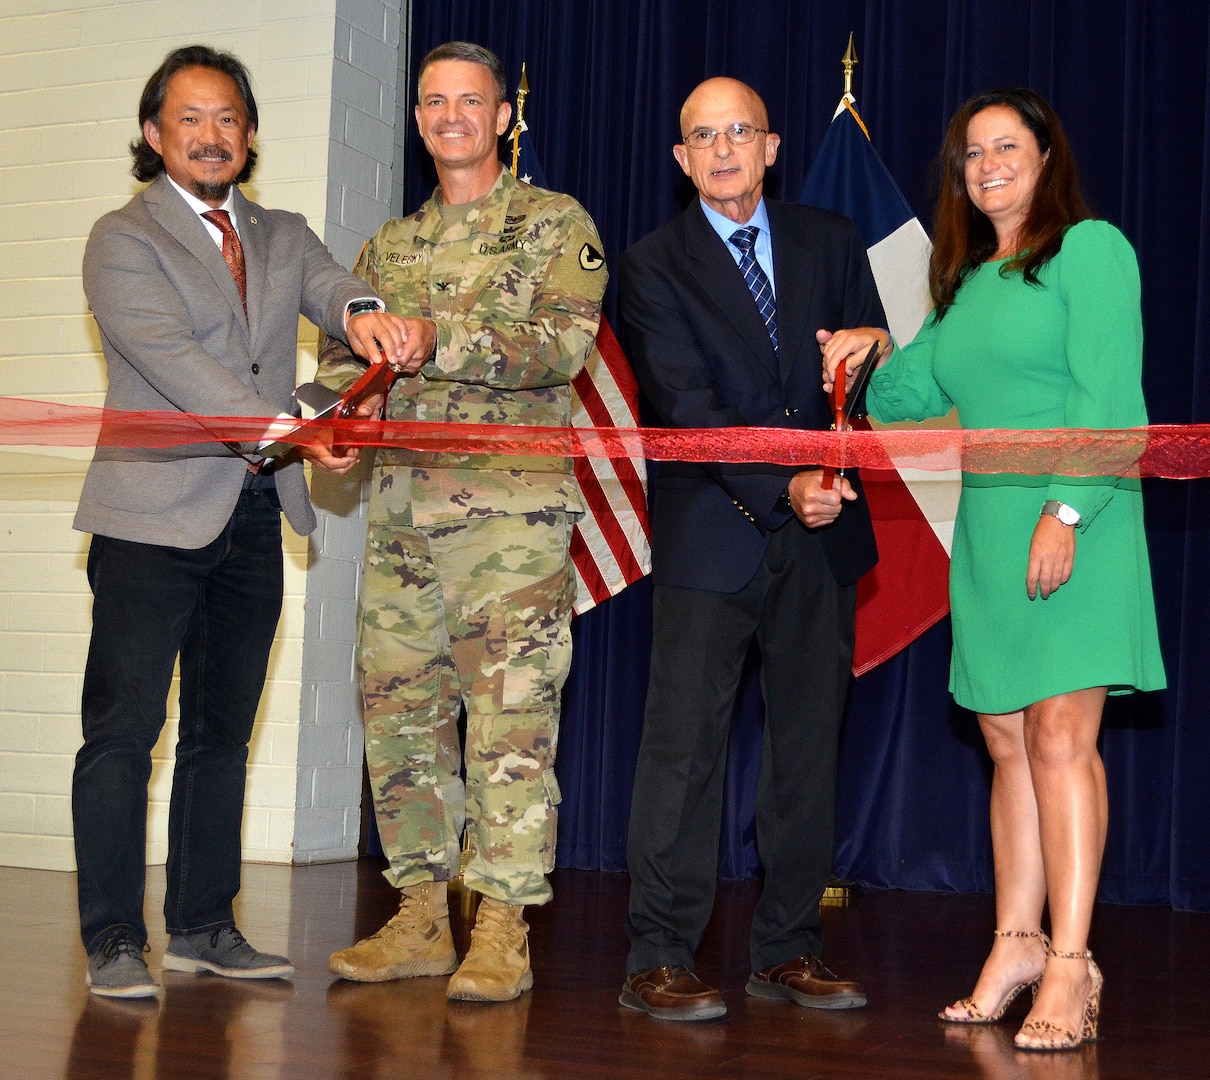 Joint Base San Antonio officials and representatives from Microsoft marked the start of a new technology career training program geared towards military spouses known as the Microsoft Military Spouse Technology Academy at a ribbon cutting at JBSA-Fort Sam Houston Military & Family Readiness Center Sept. 27. Cutting the ribbon are (from left) Danny Chung, Microsoft military affairs chief of staff; Col. Peter Velesky, JBSA and 502nd Air Base Wing deputy commander; retired Maj. Gen. Chris Cortez, Microsoft vice president of military affairs; and Elizabeth O’Brien, U.S. Chamber of Commerce senior director of Hiring Our Heroes Military Spouse Program.